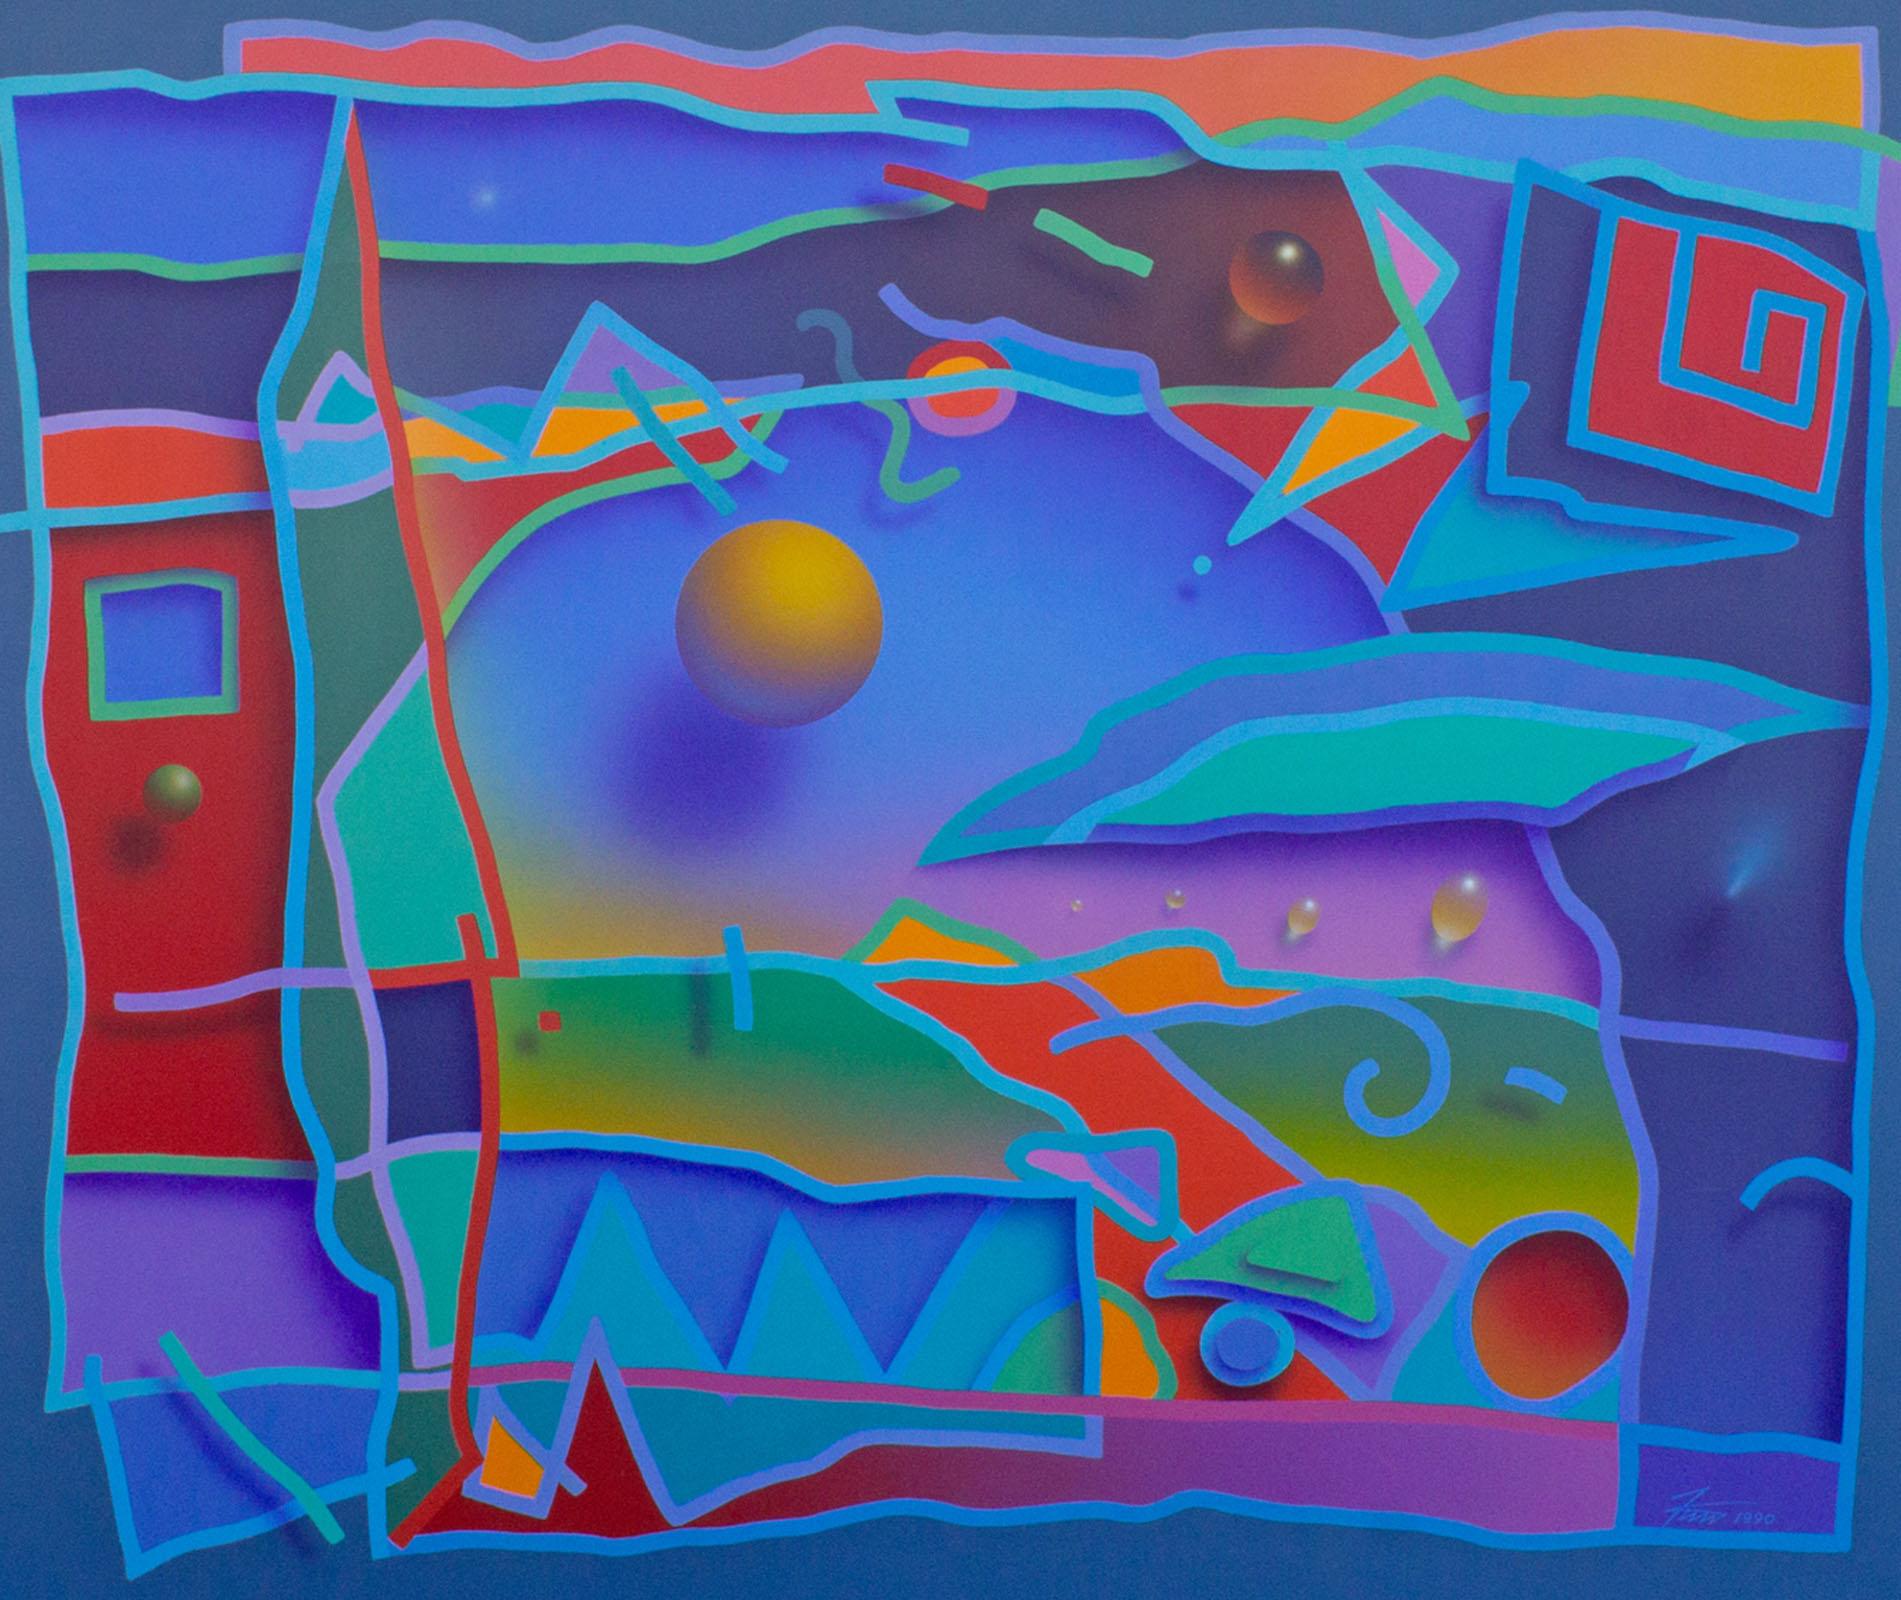 A 1990 acrylic on canvas painting by the American artist James Wille Faust (born 1949). This vibrant work depicts a layering of shapes and designs painted in such a way to create an optical illusion of floating objects and dimensionality. Signed and